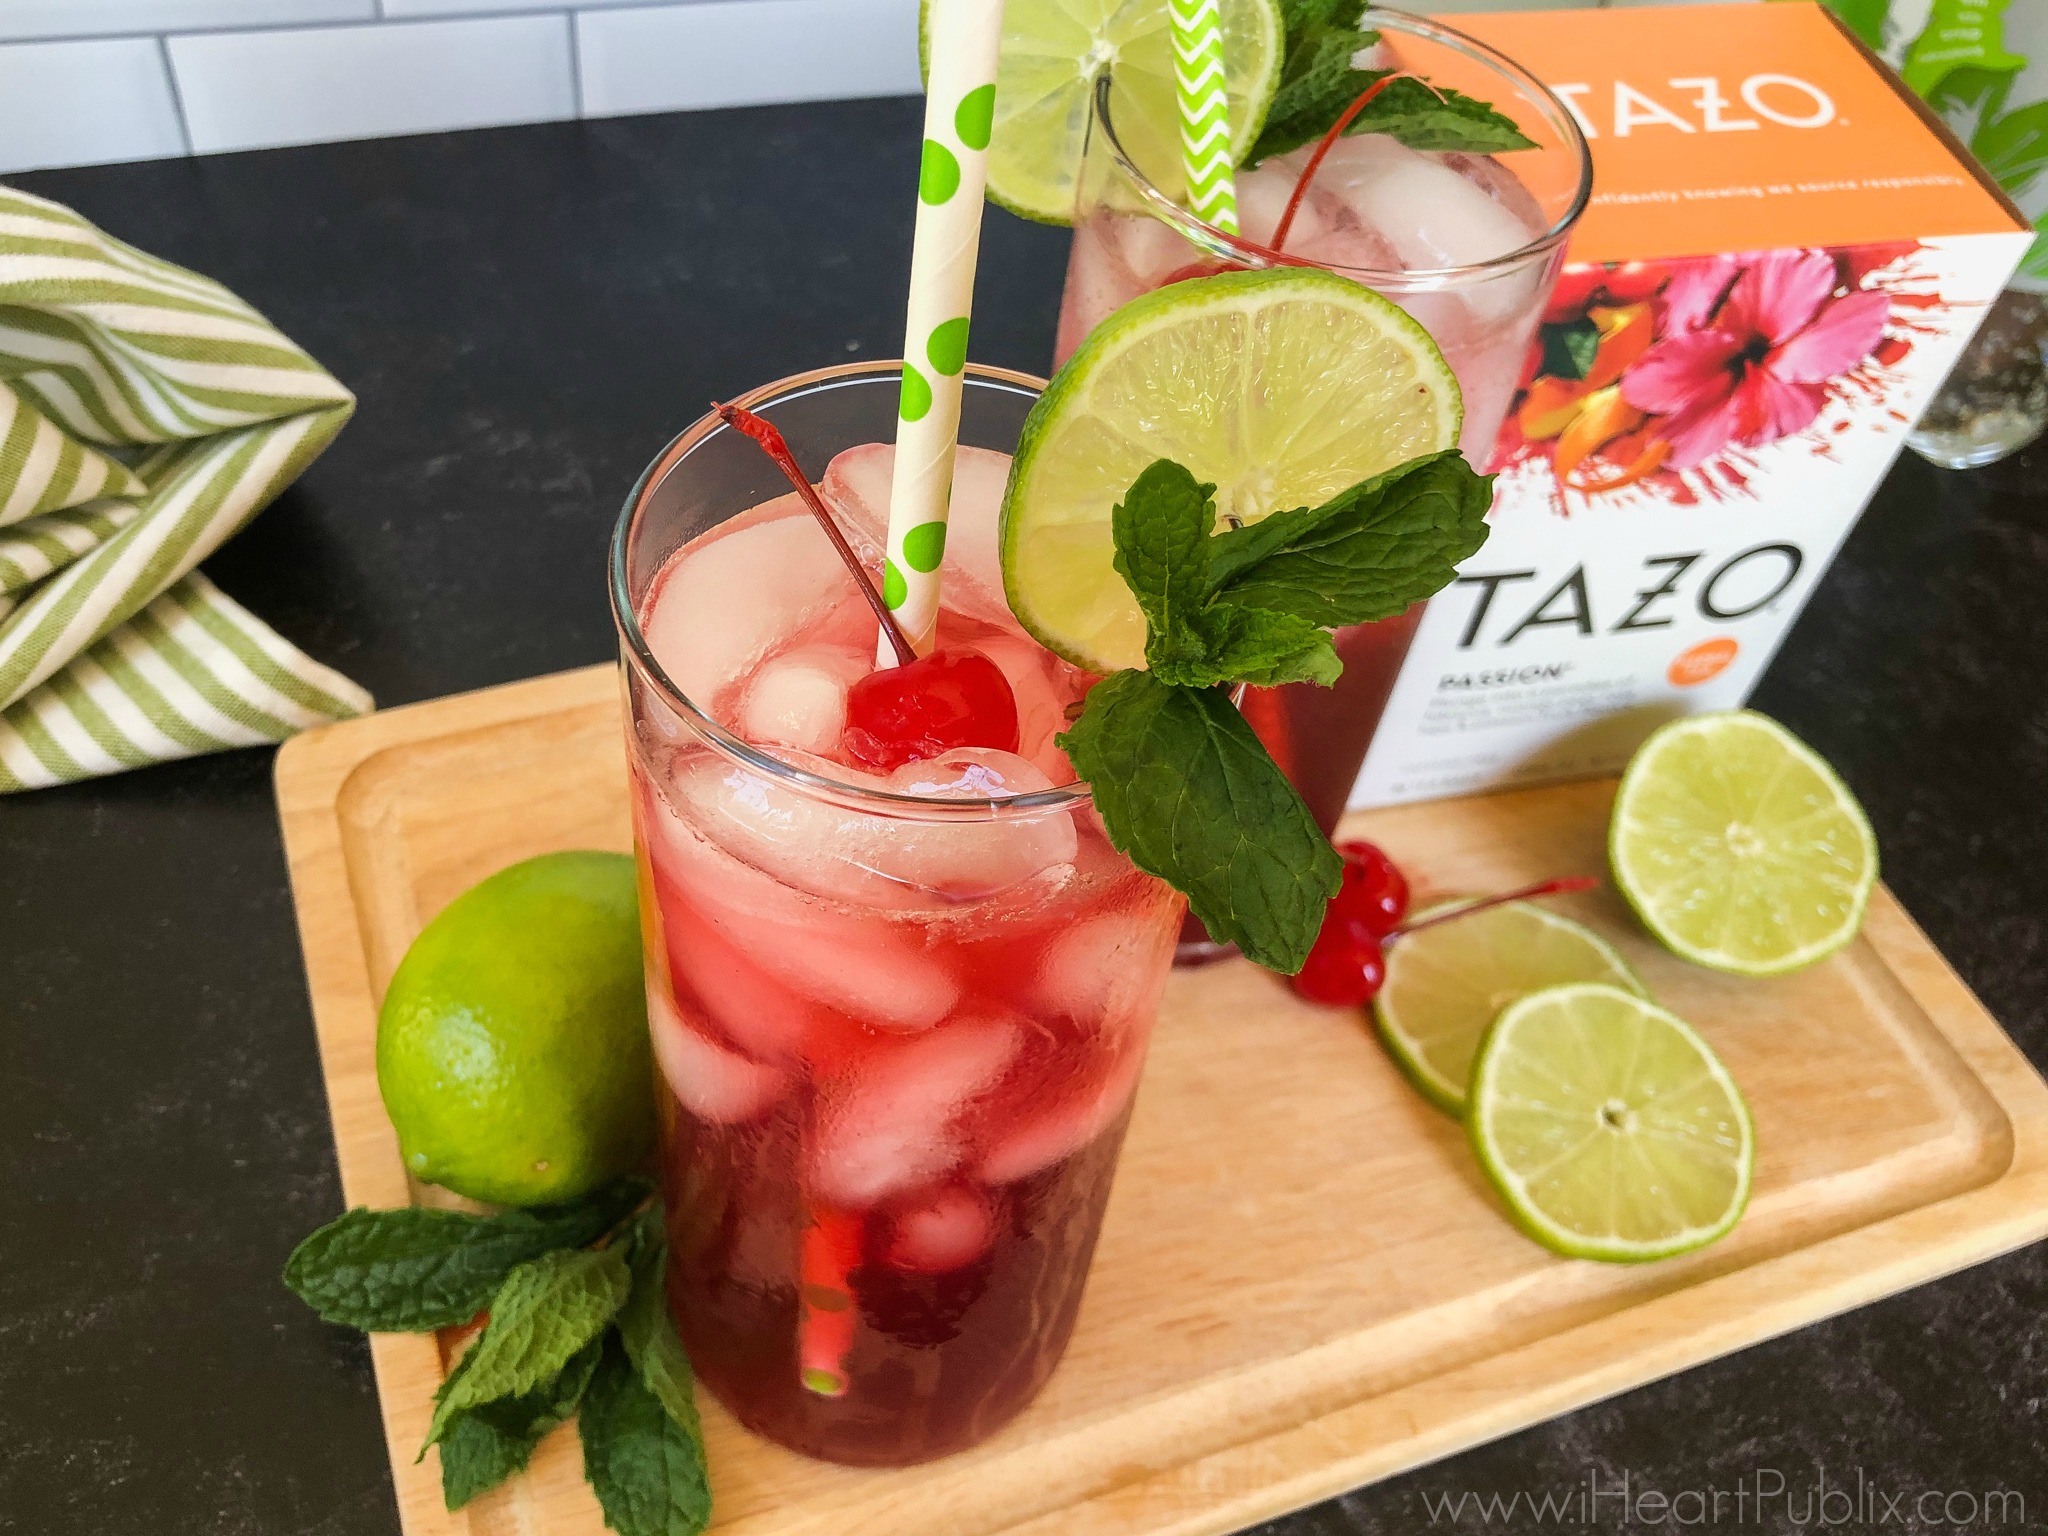 Try My TAZO Sparkling Passion Tea Limeade - Save On Your Favorite Now At Publix on I Heart Publix